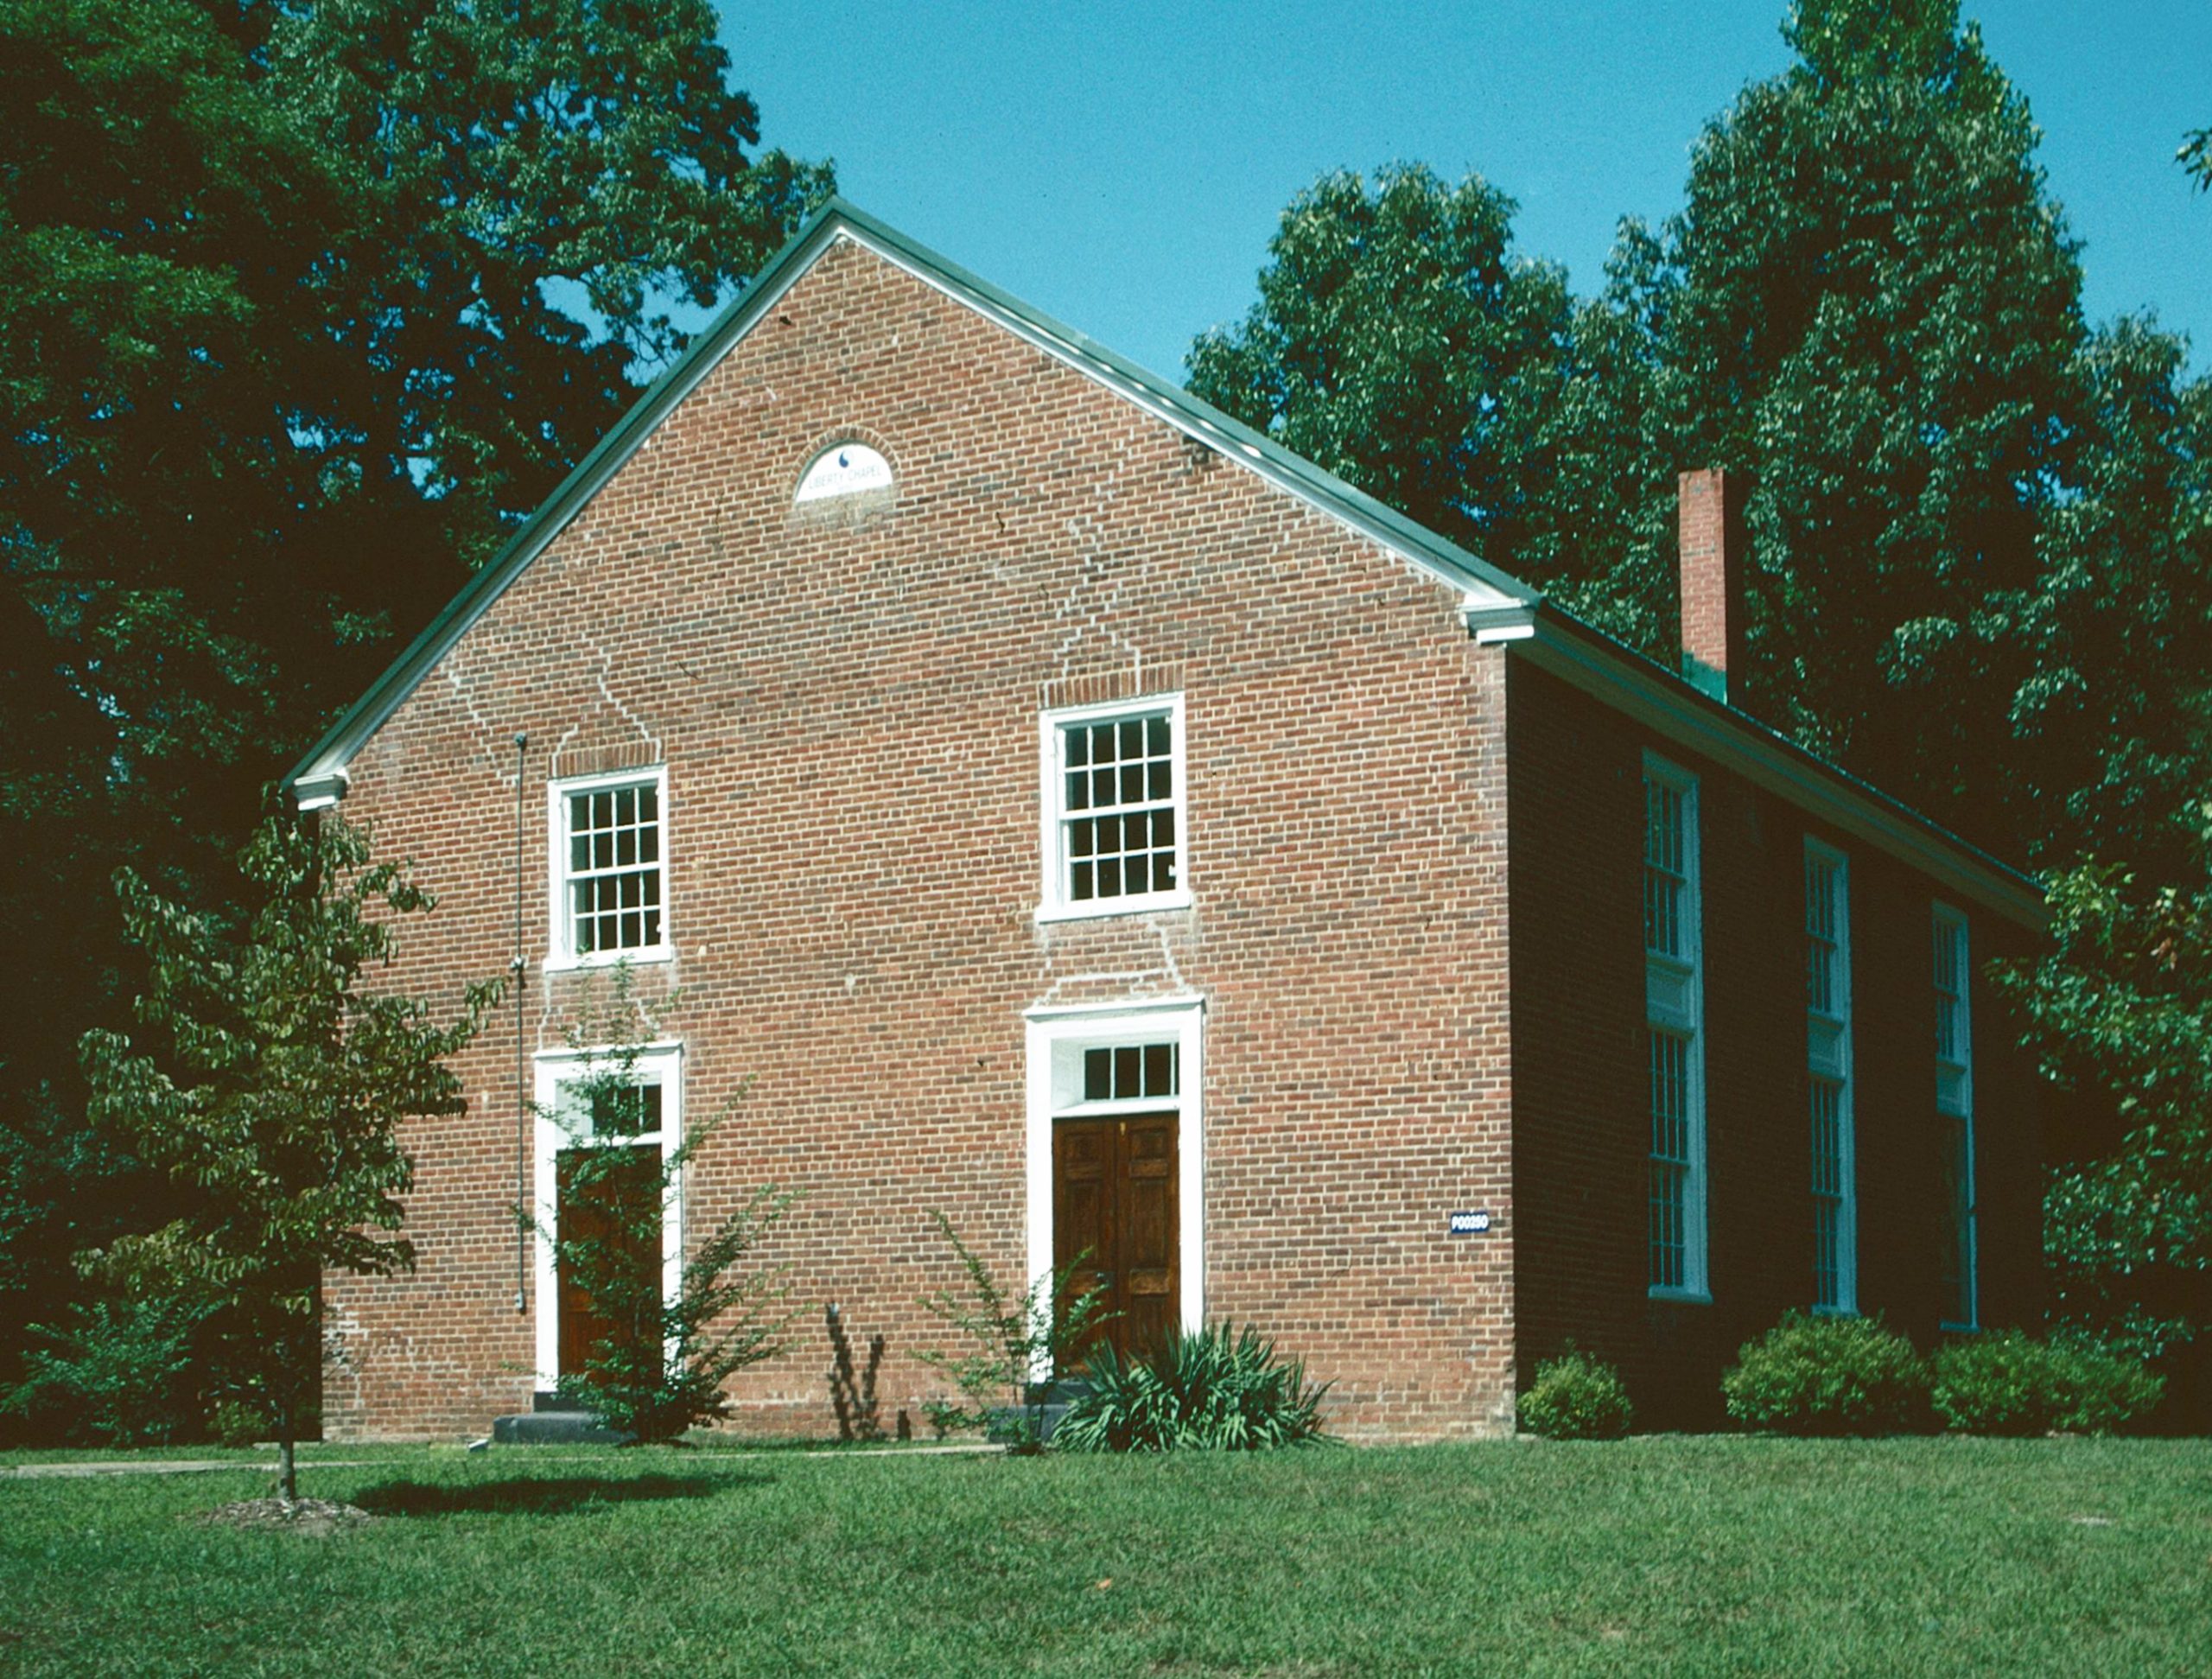 016-0069_LibertyBaptistChurch_1993_exterior_front_oblique_VLR_Online-scaled